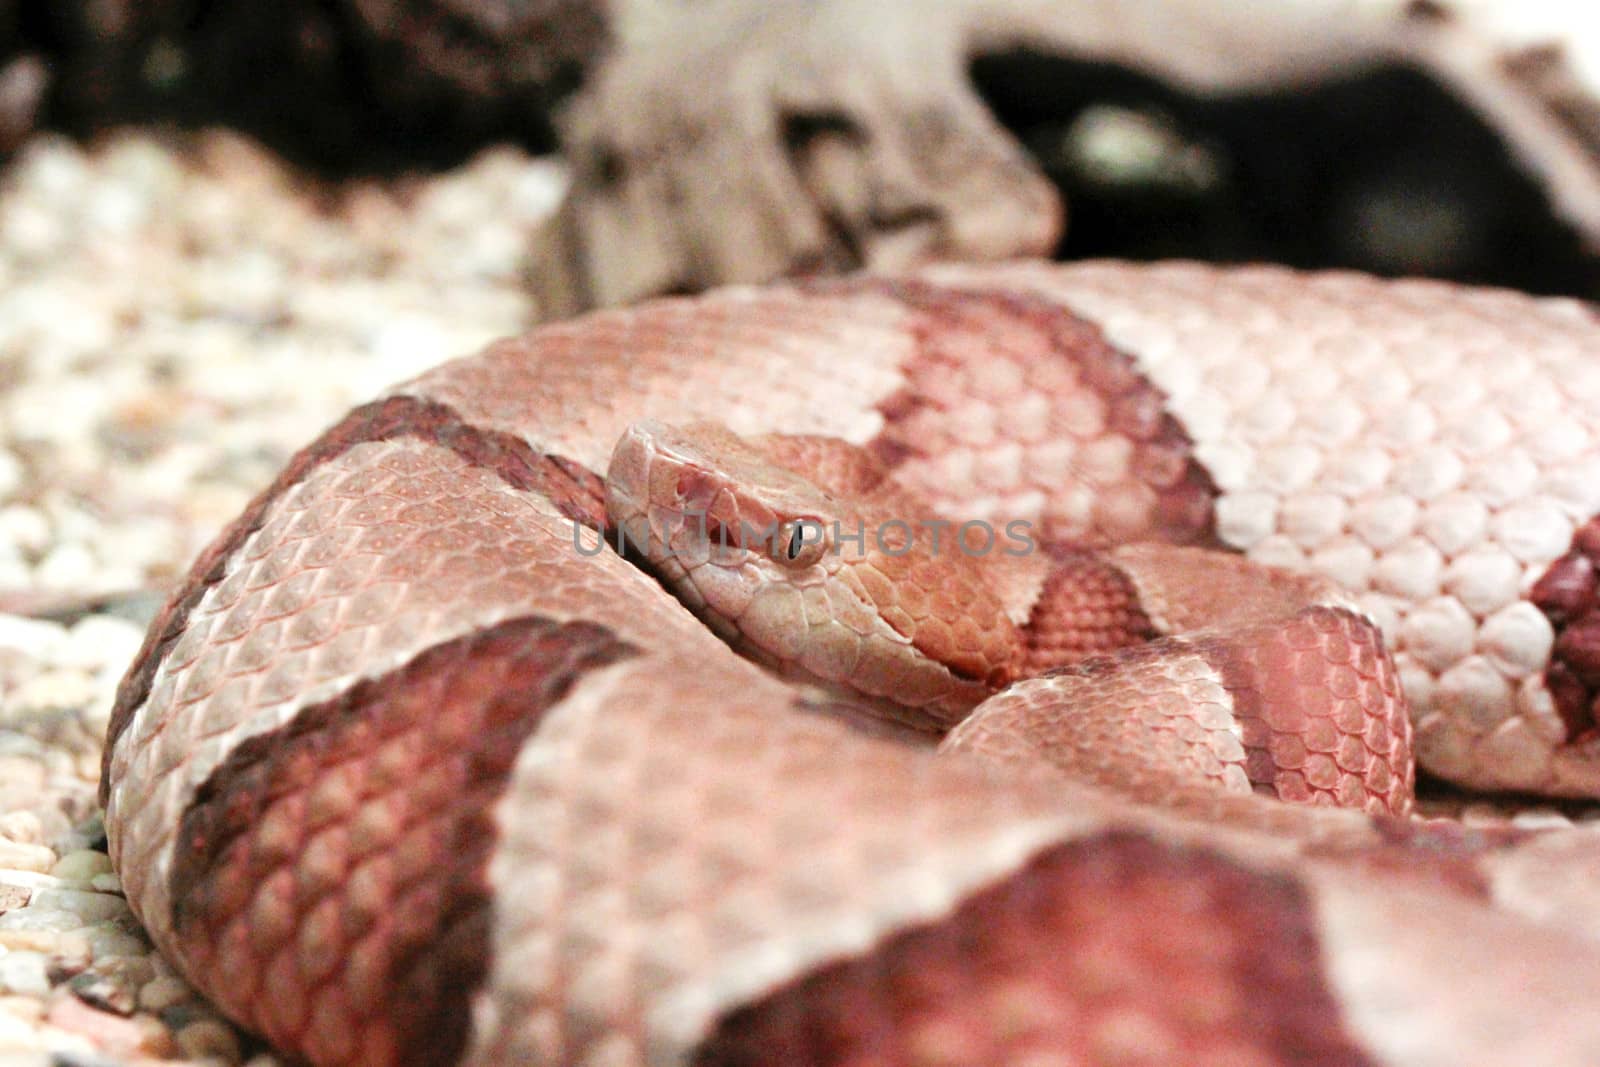 Copperhead in natural habitat with blurred background